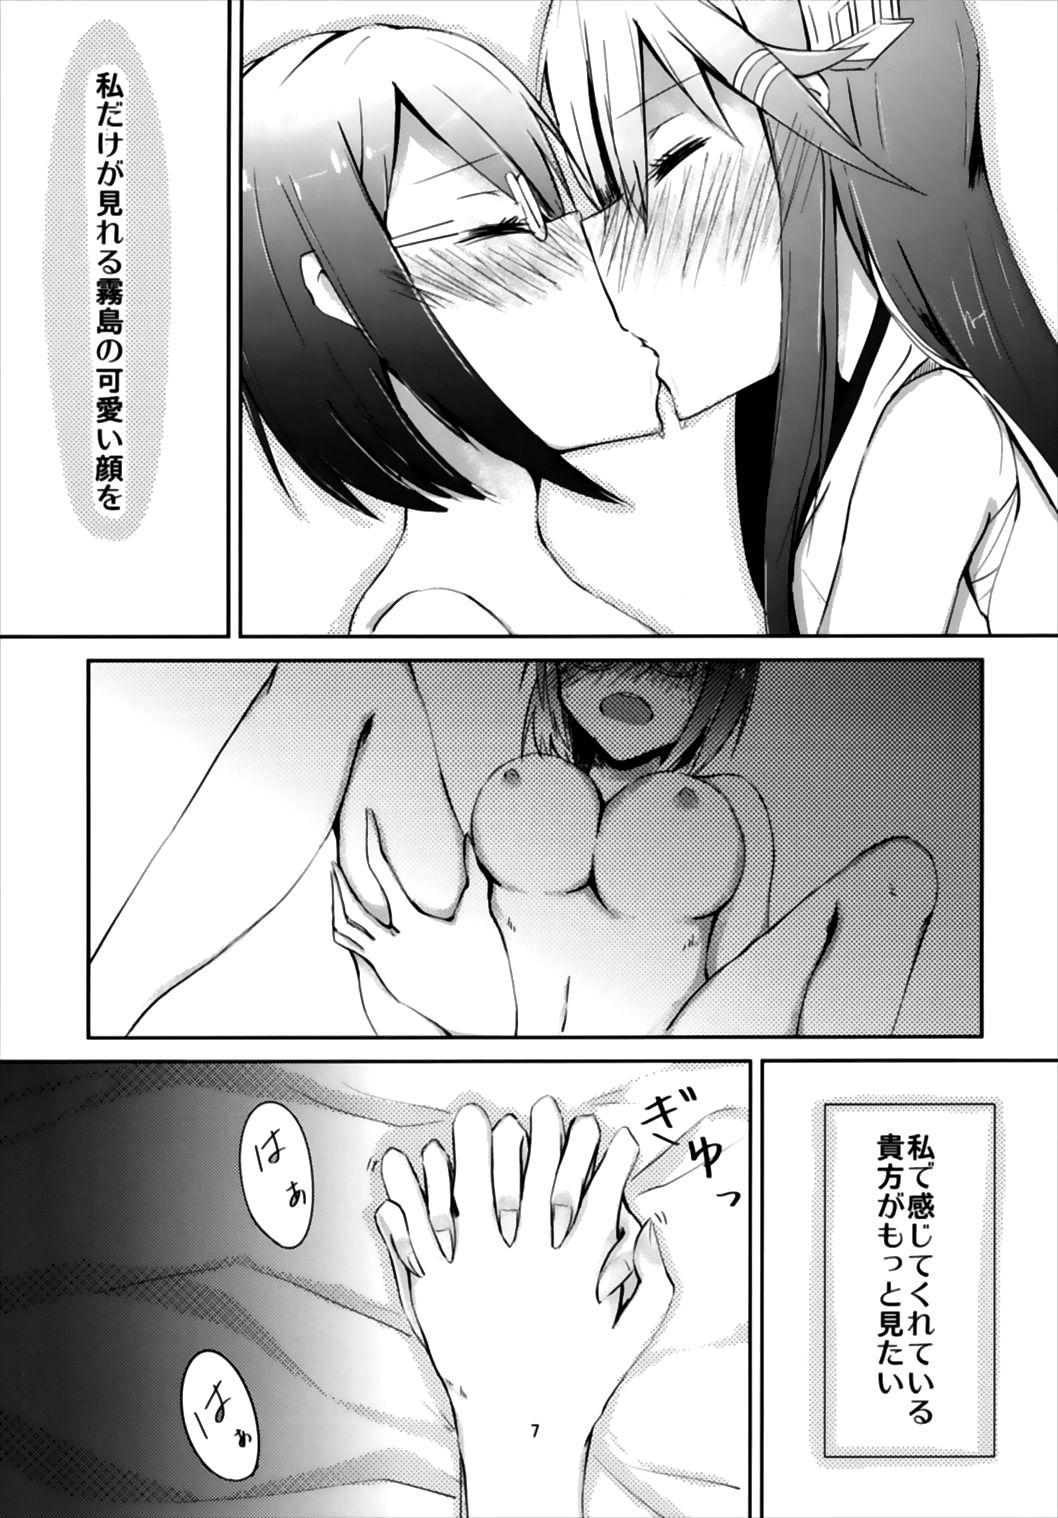 Blackmail Face to Face - Kantai collection Unshaved - Page 9